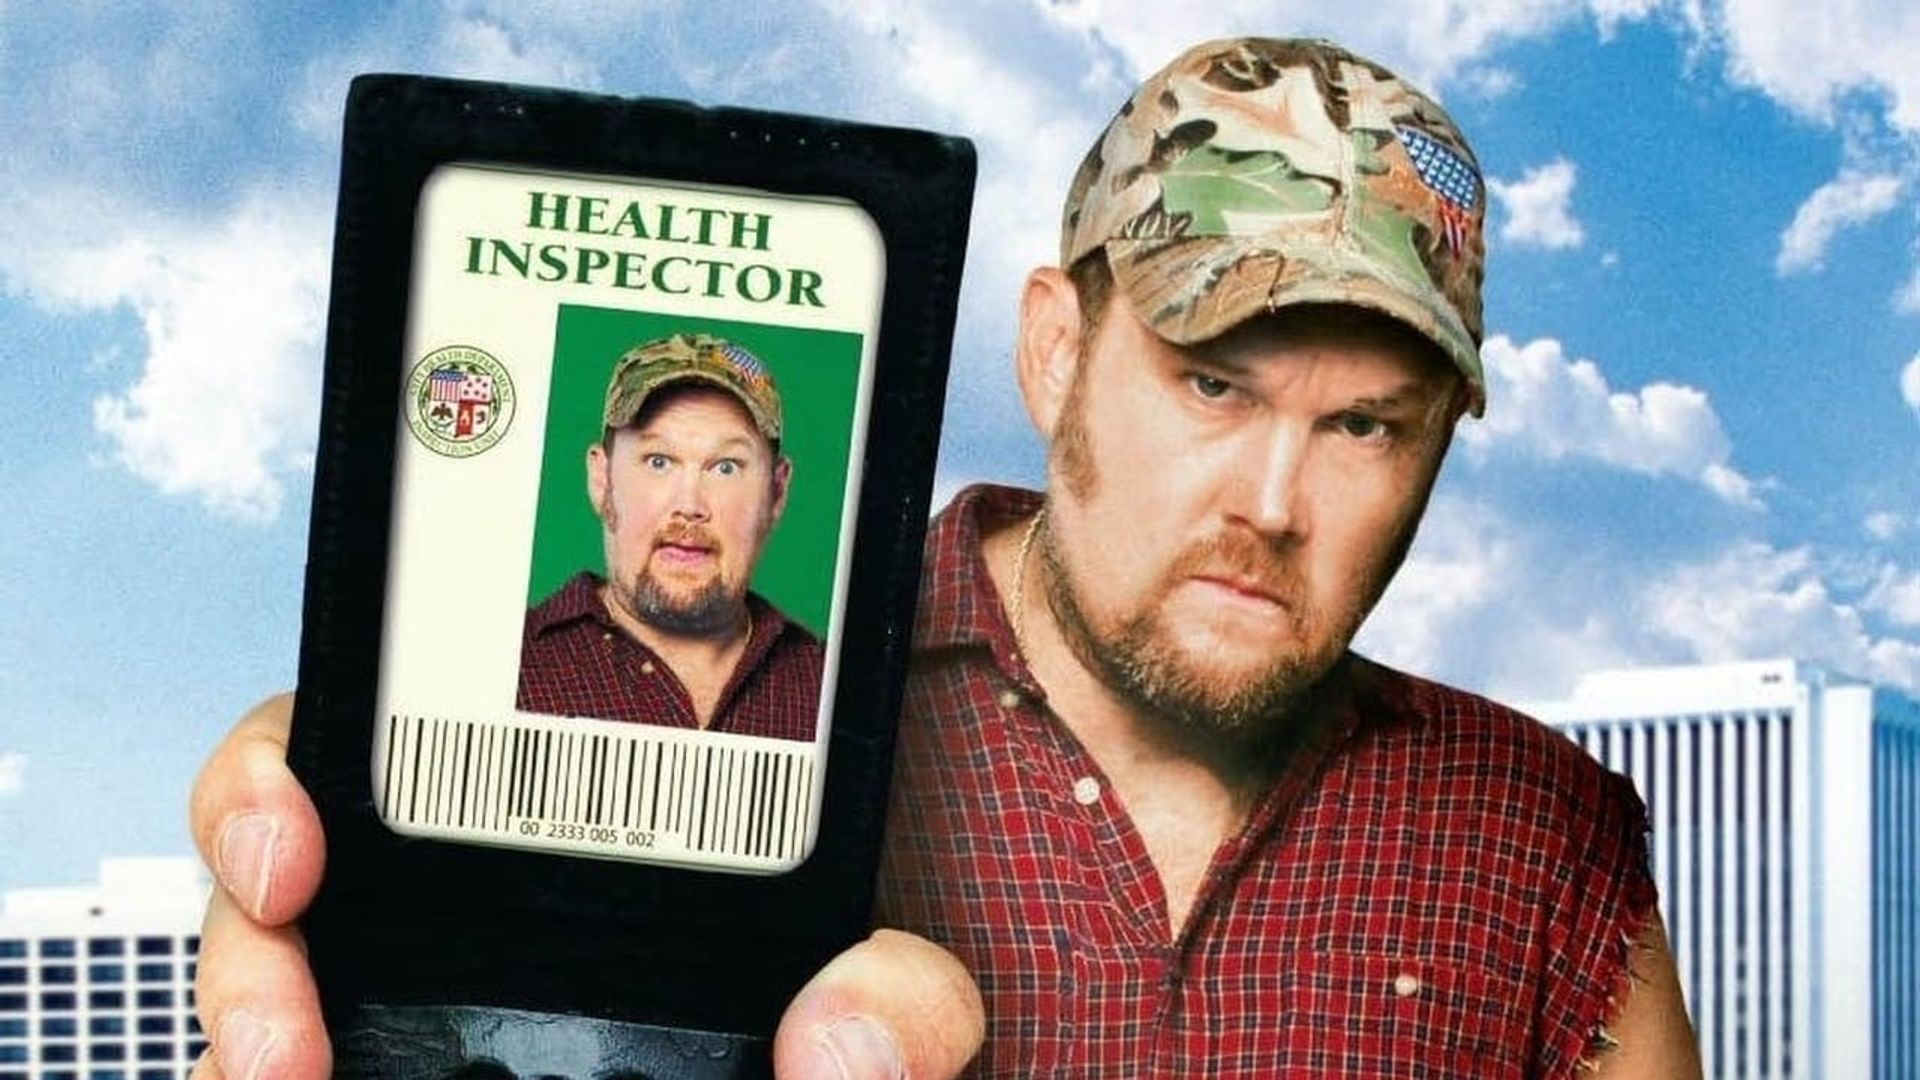 Larry the Cable Guy: Health Inspector Backdrop